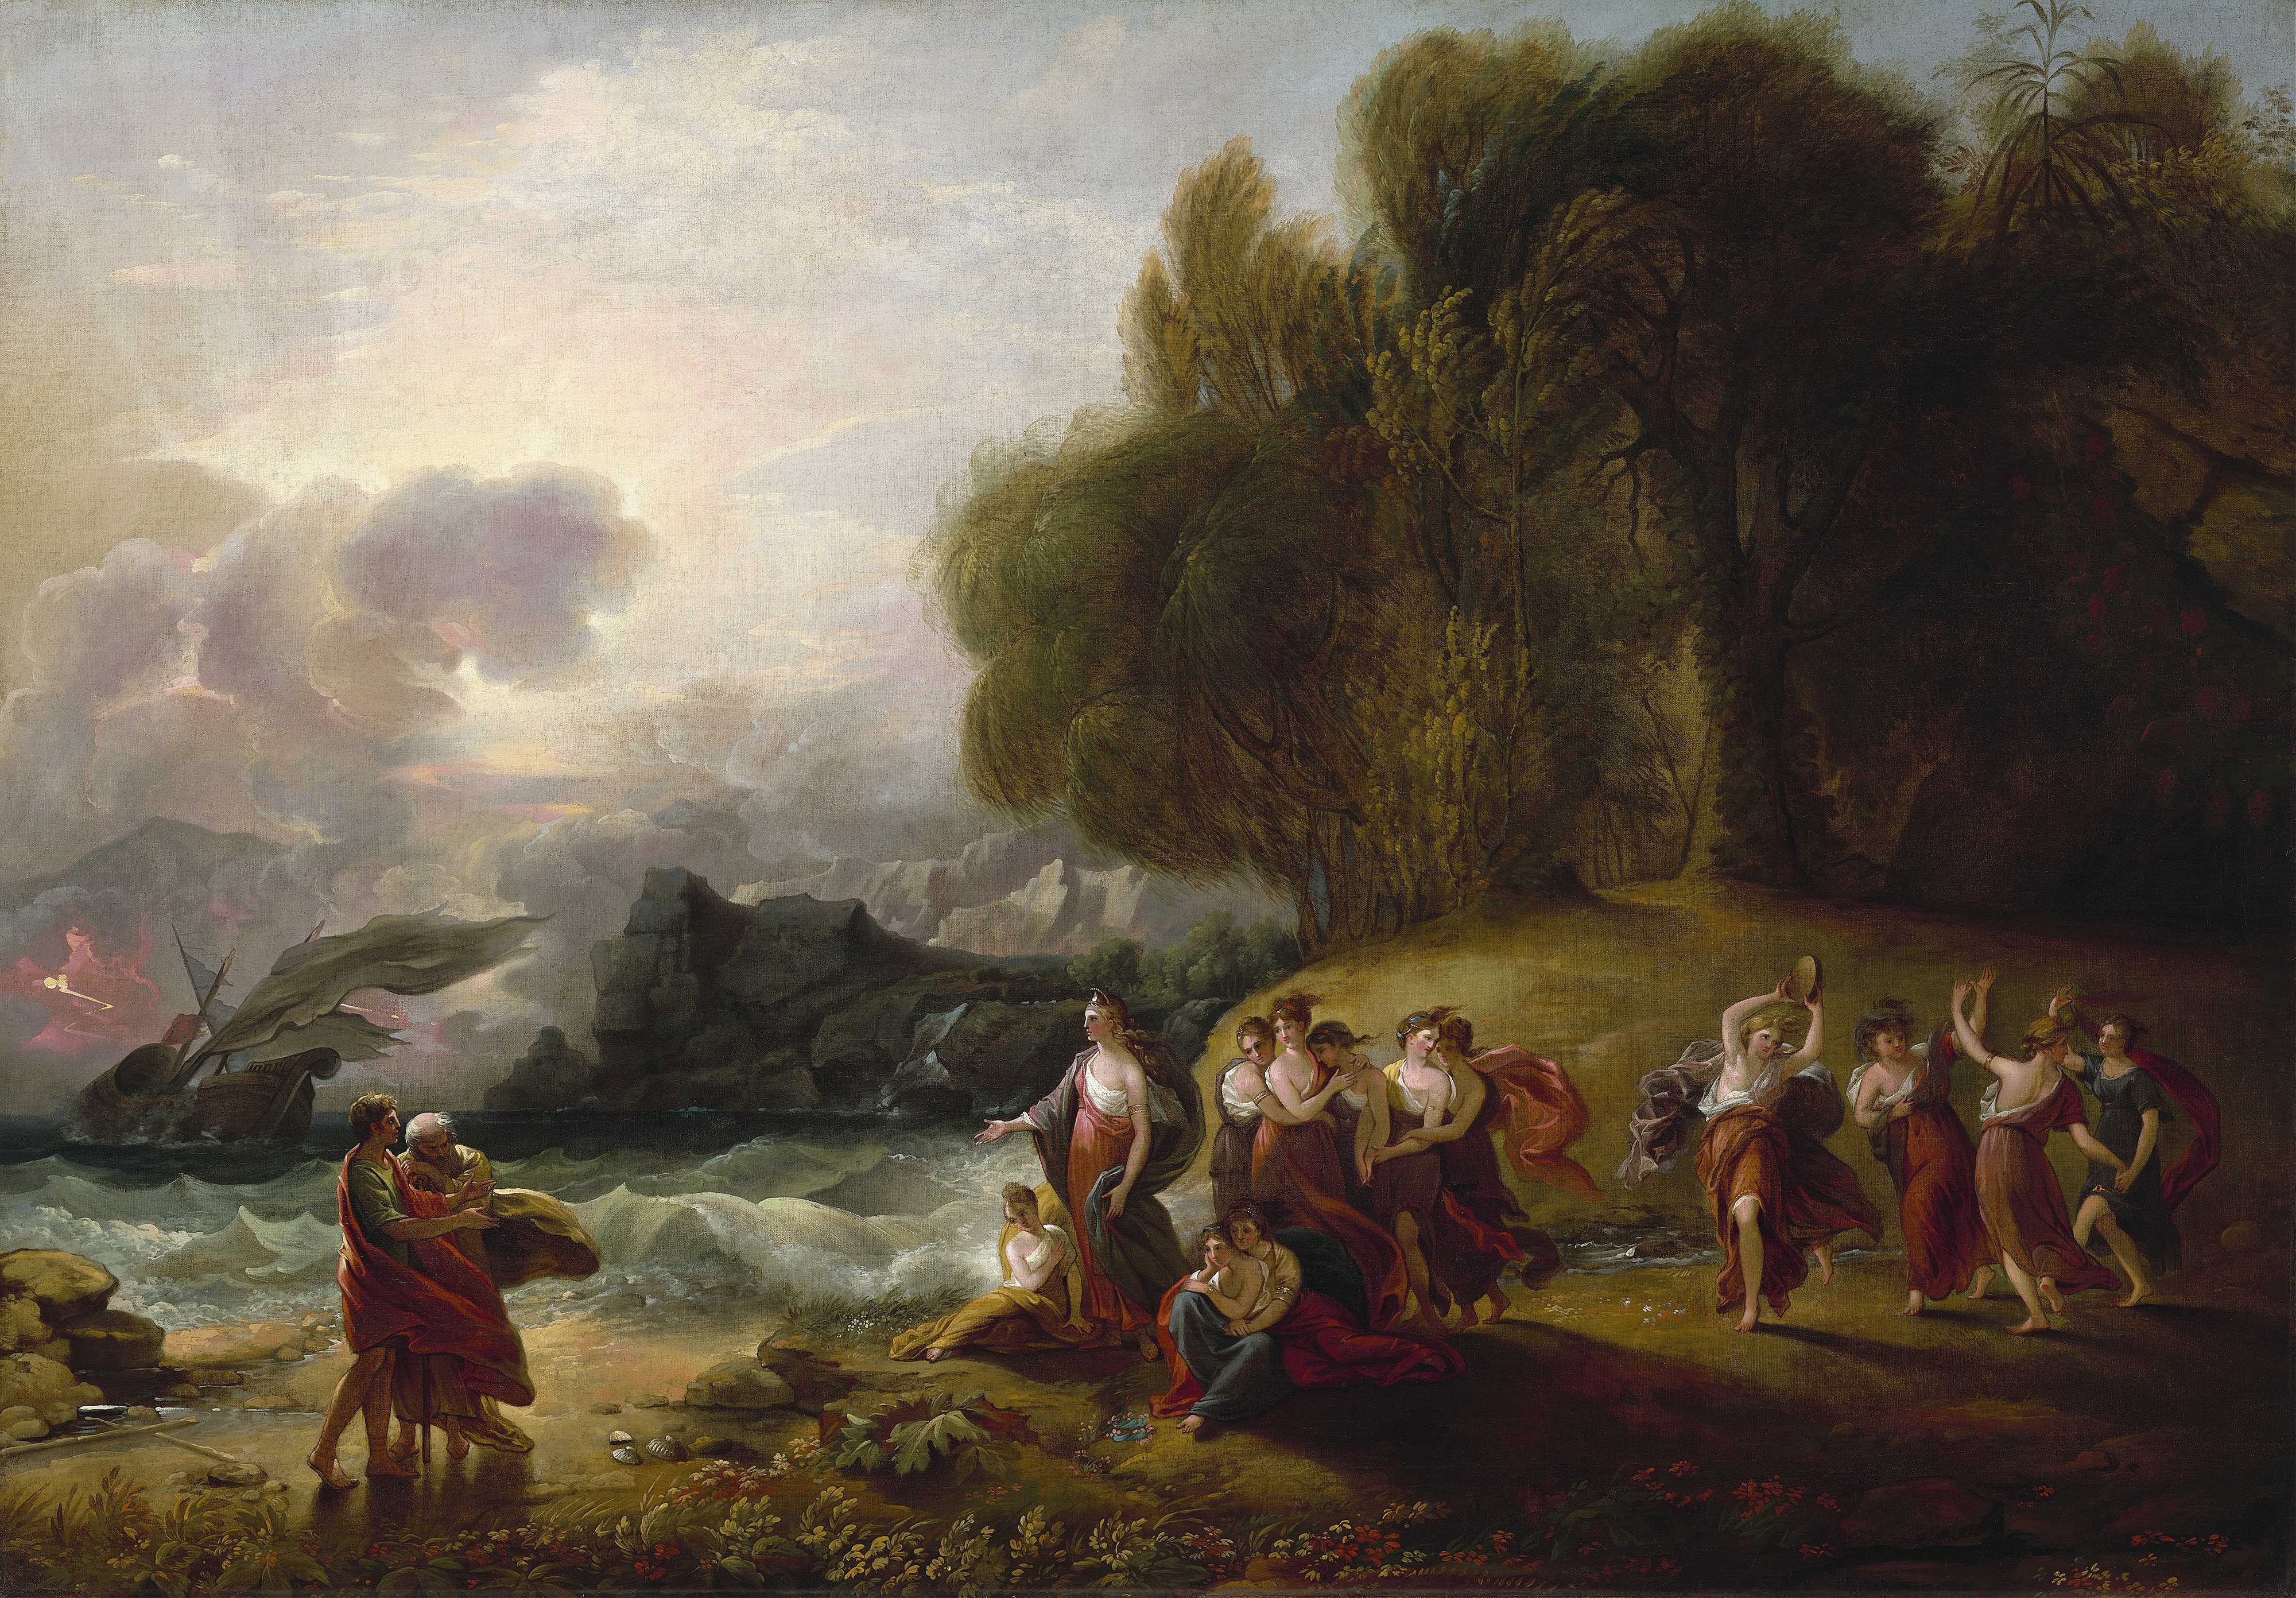 Find out more about Benjamin West - Telemachus and Calypso